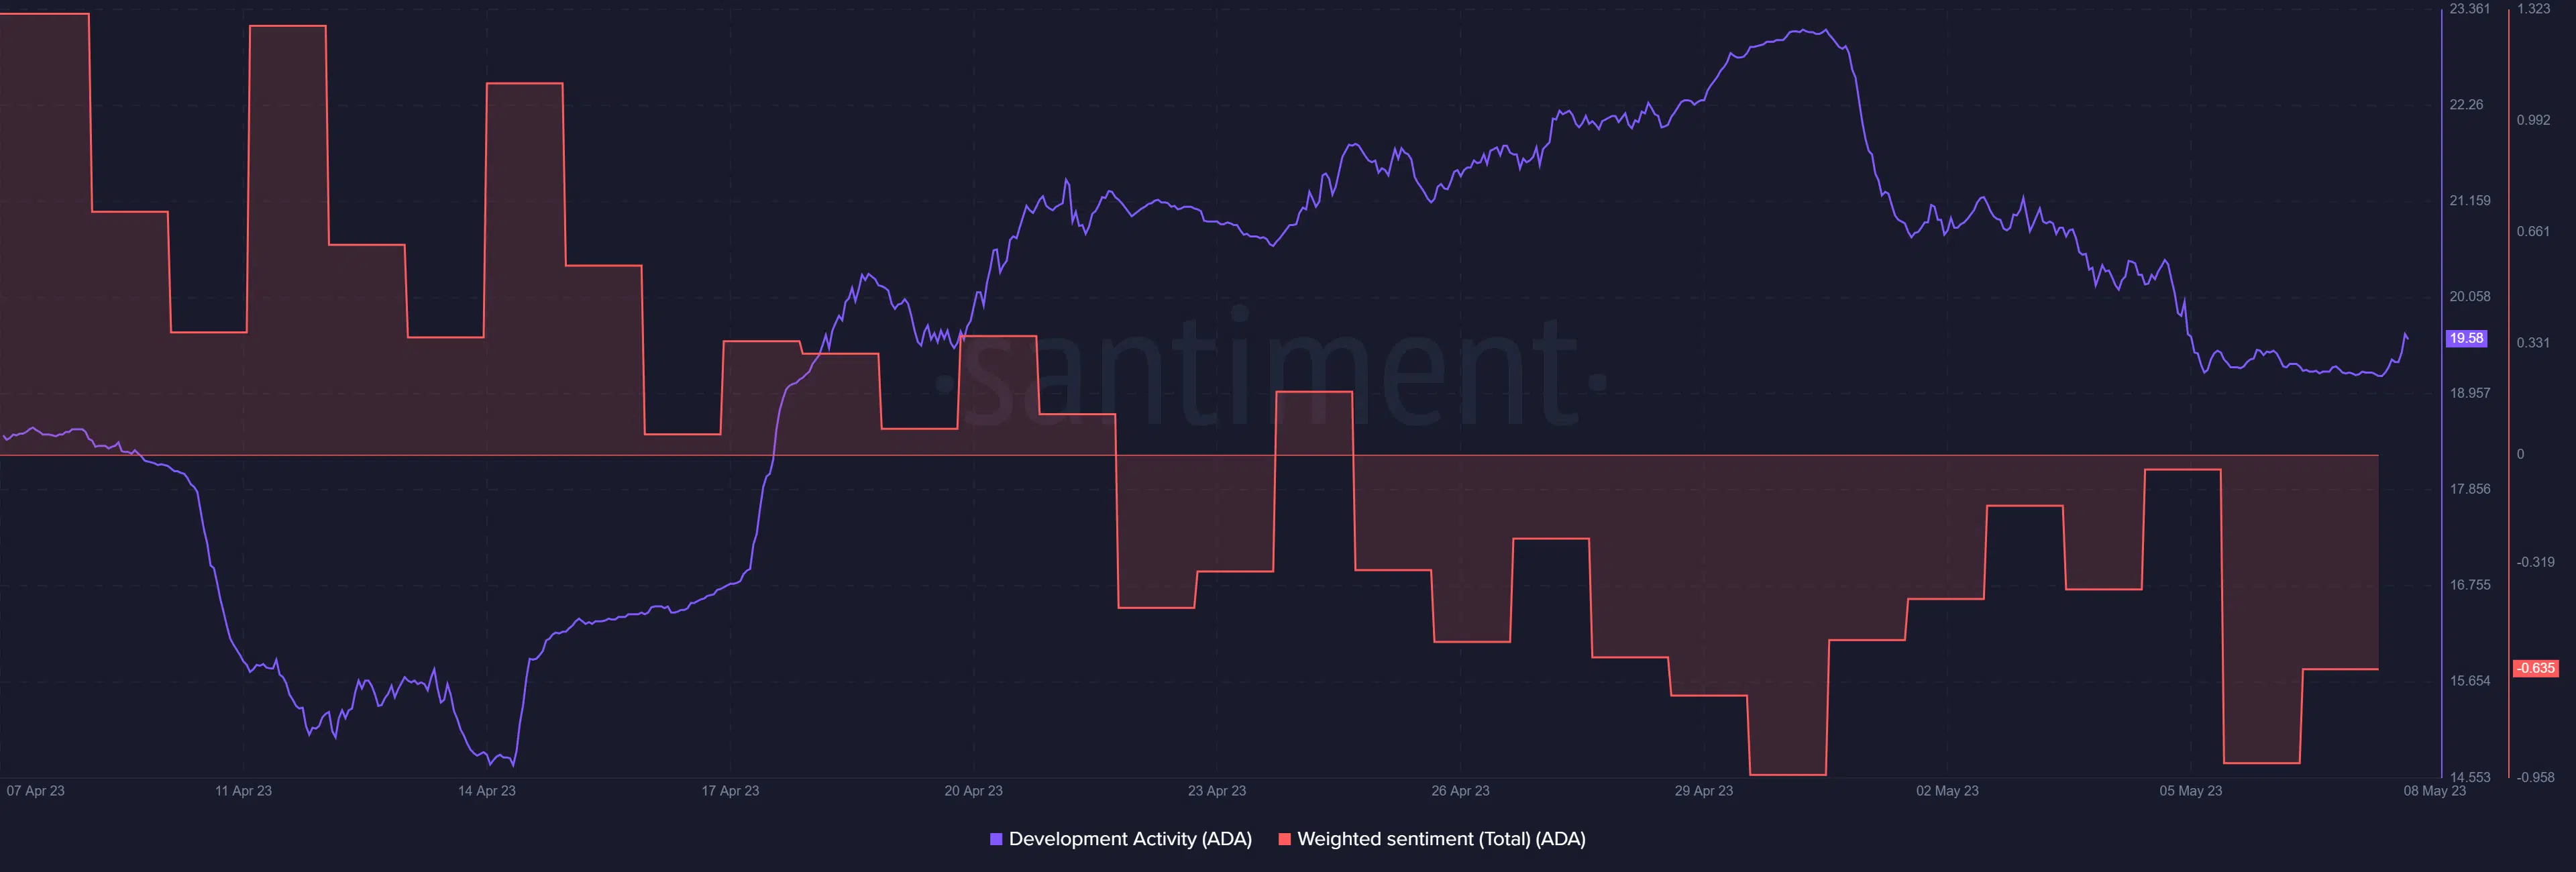 Cardano development activity and weighted sentiment